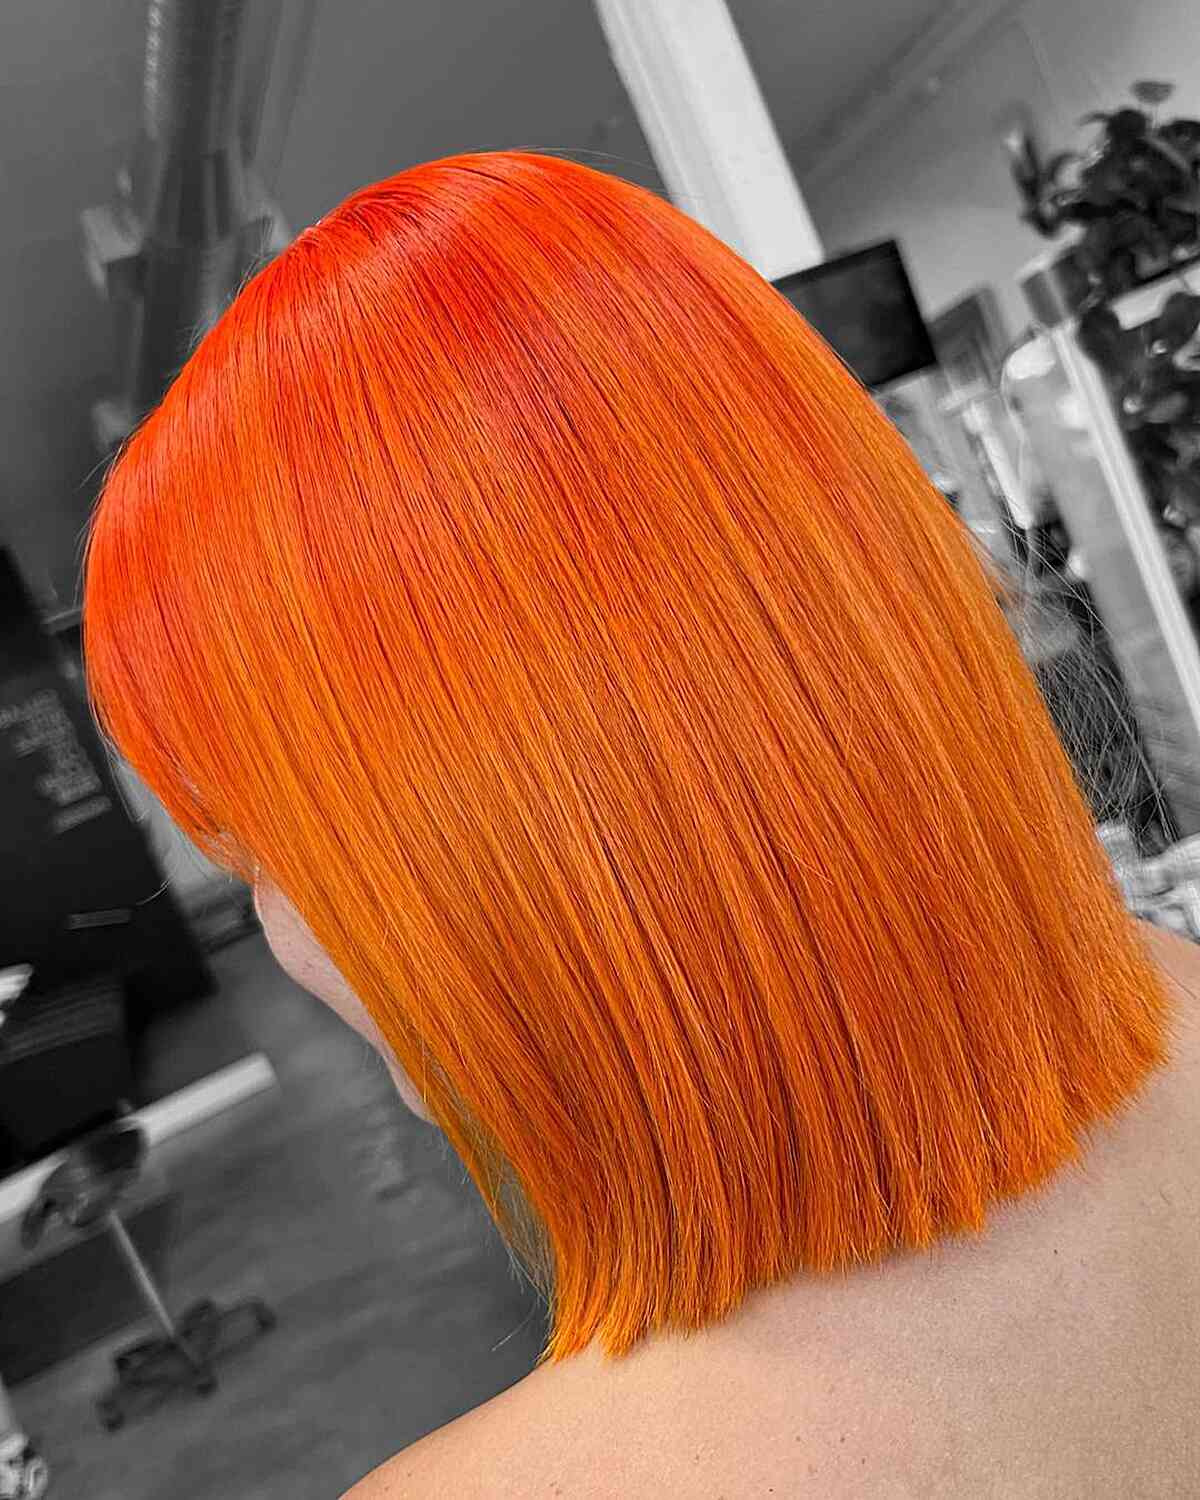 Very Bold and Solid Orange Hair